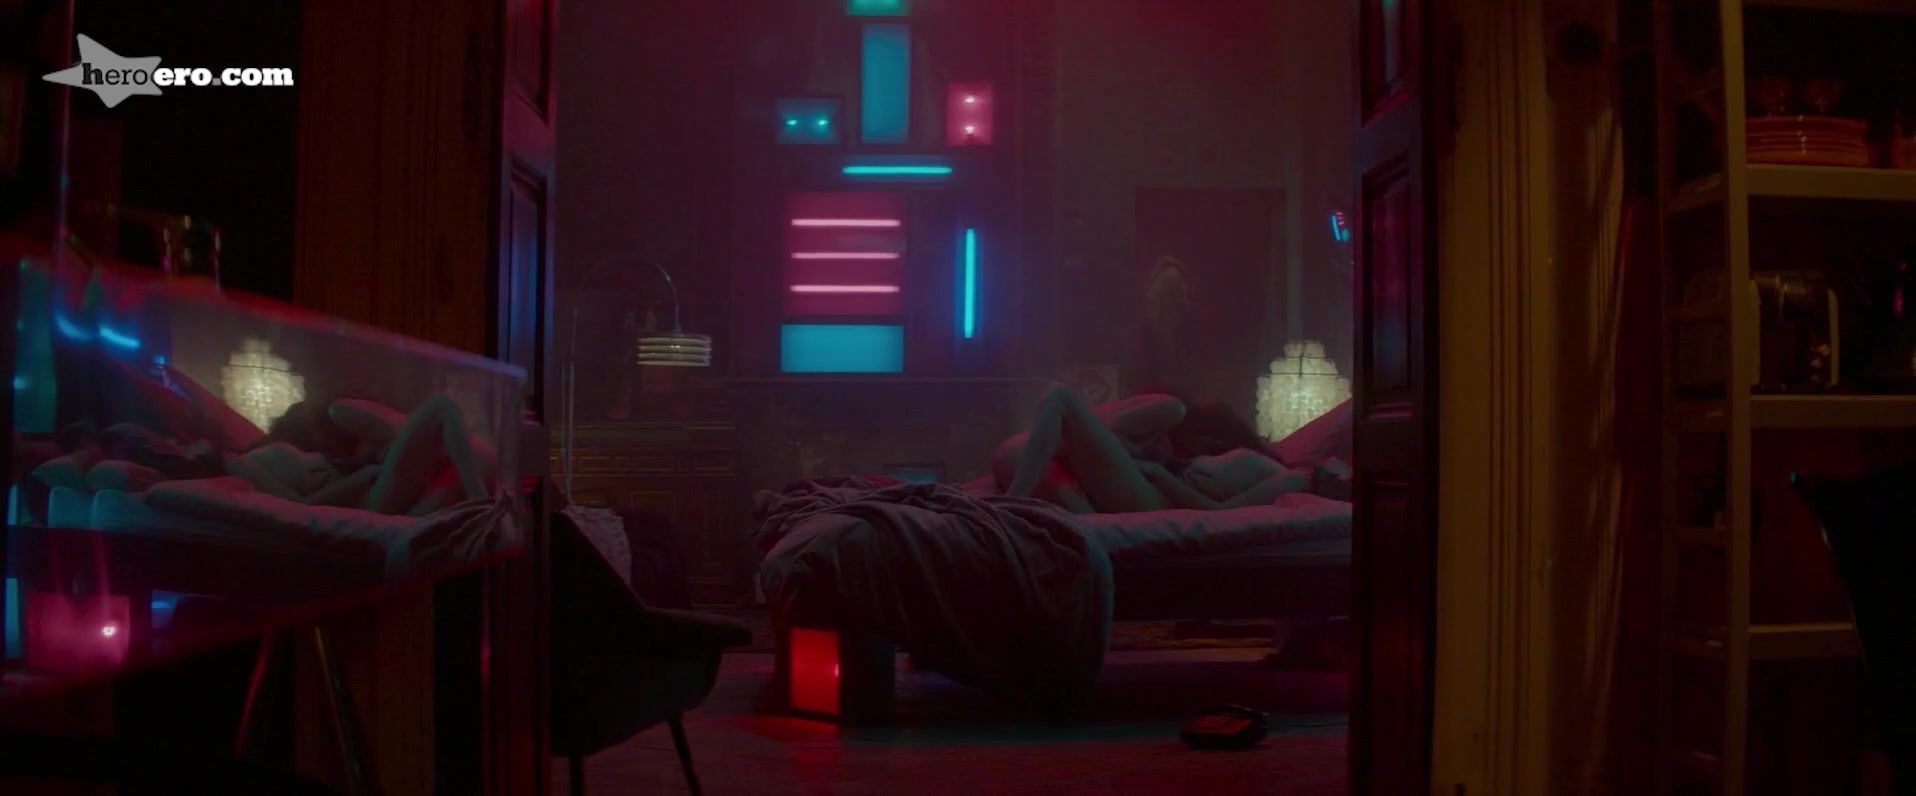 Hard Porn Charlize Theron, Sofia Boutella Nude - Atomic Blonde (US 2017) Eating Pussy - 1